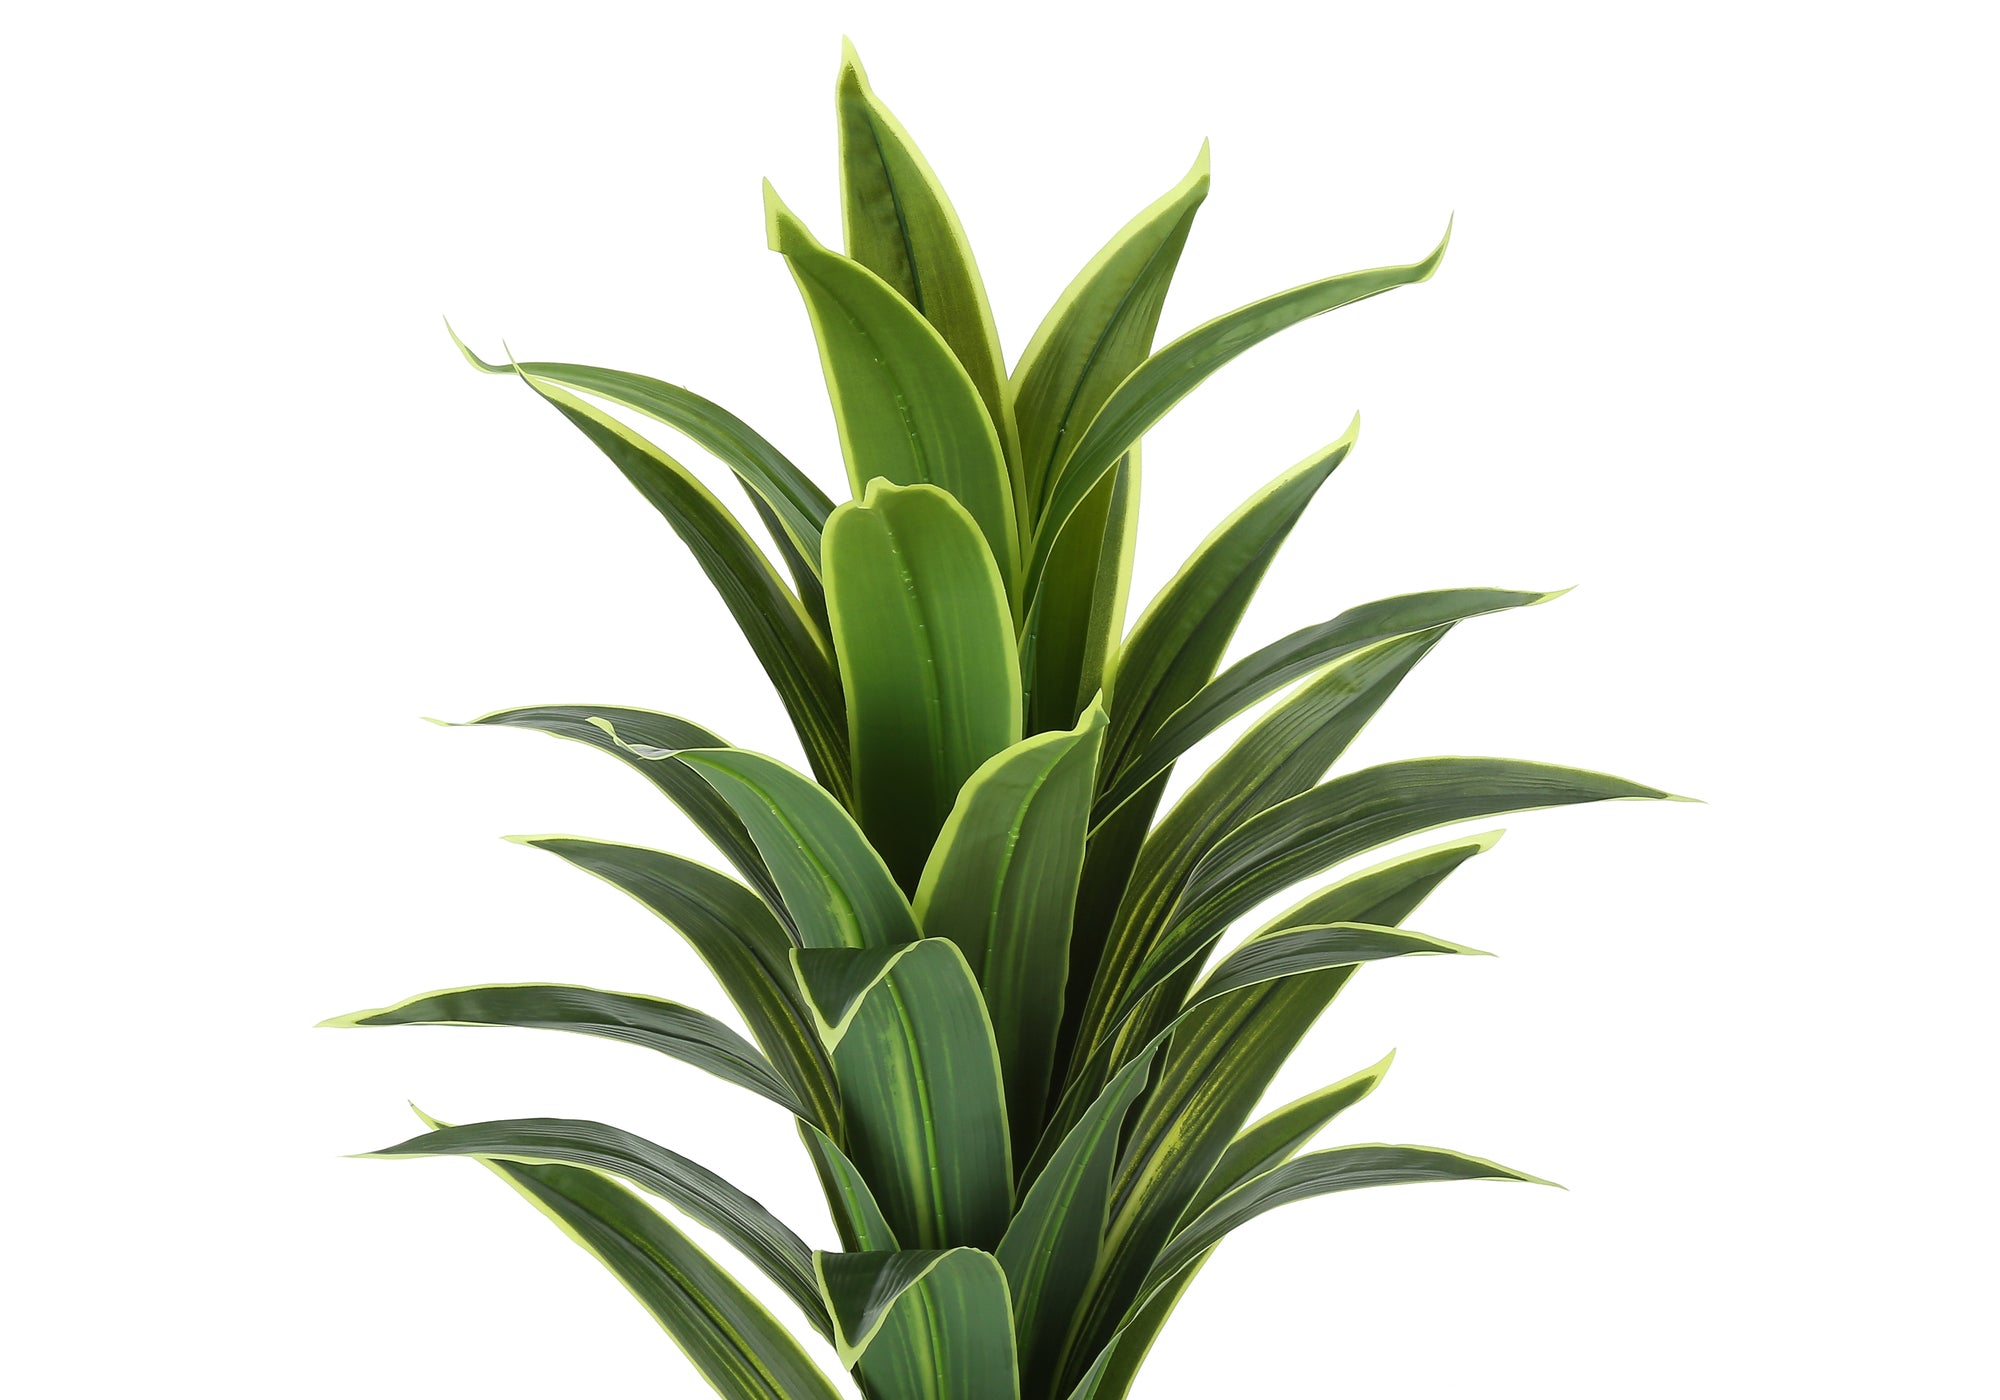 MN-489542    Artificial Plant, 47" Tall, Dracaena Tree, Indoor, Faux, Fake, Floor, Greenery, Potted, Real Touch, Decorative, Green Leaves, Black Pot